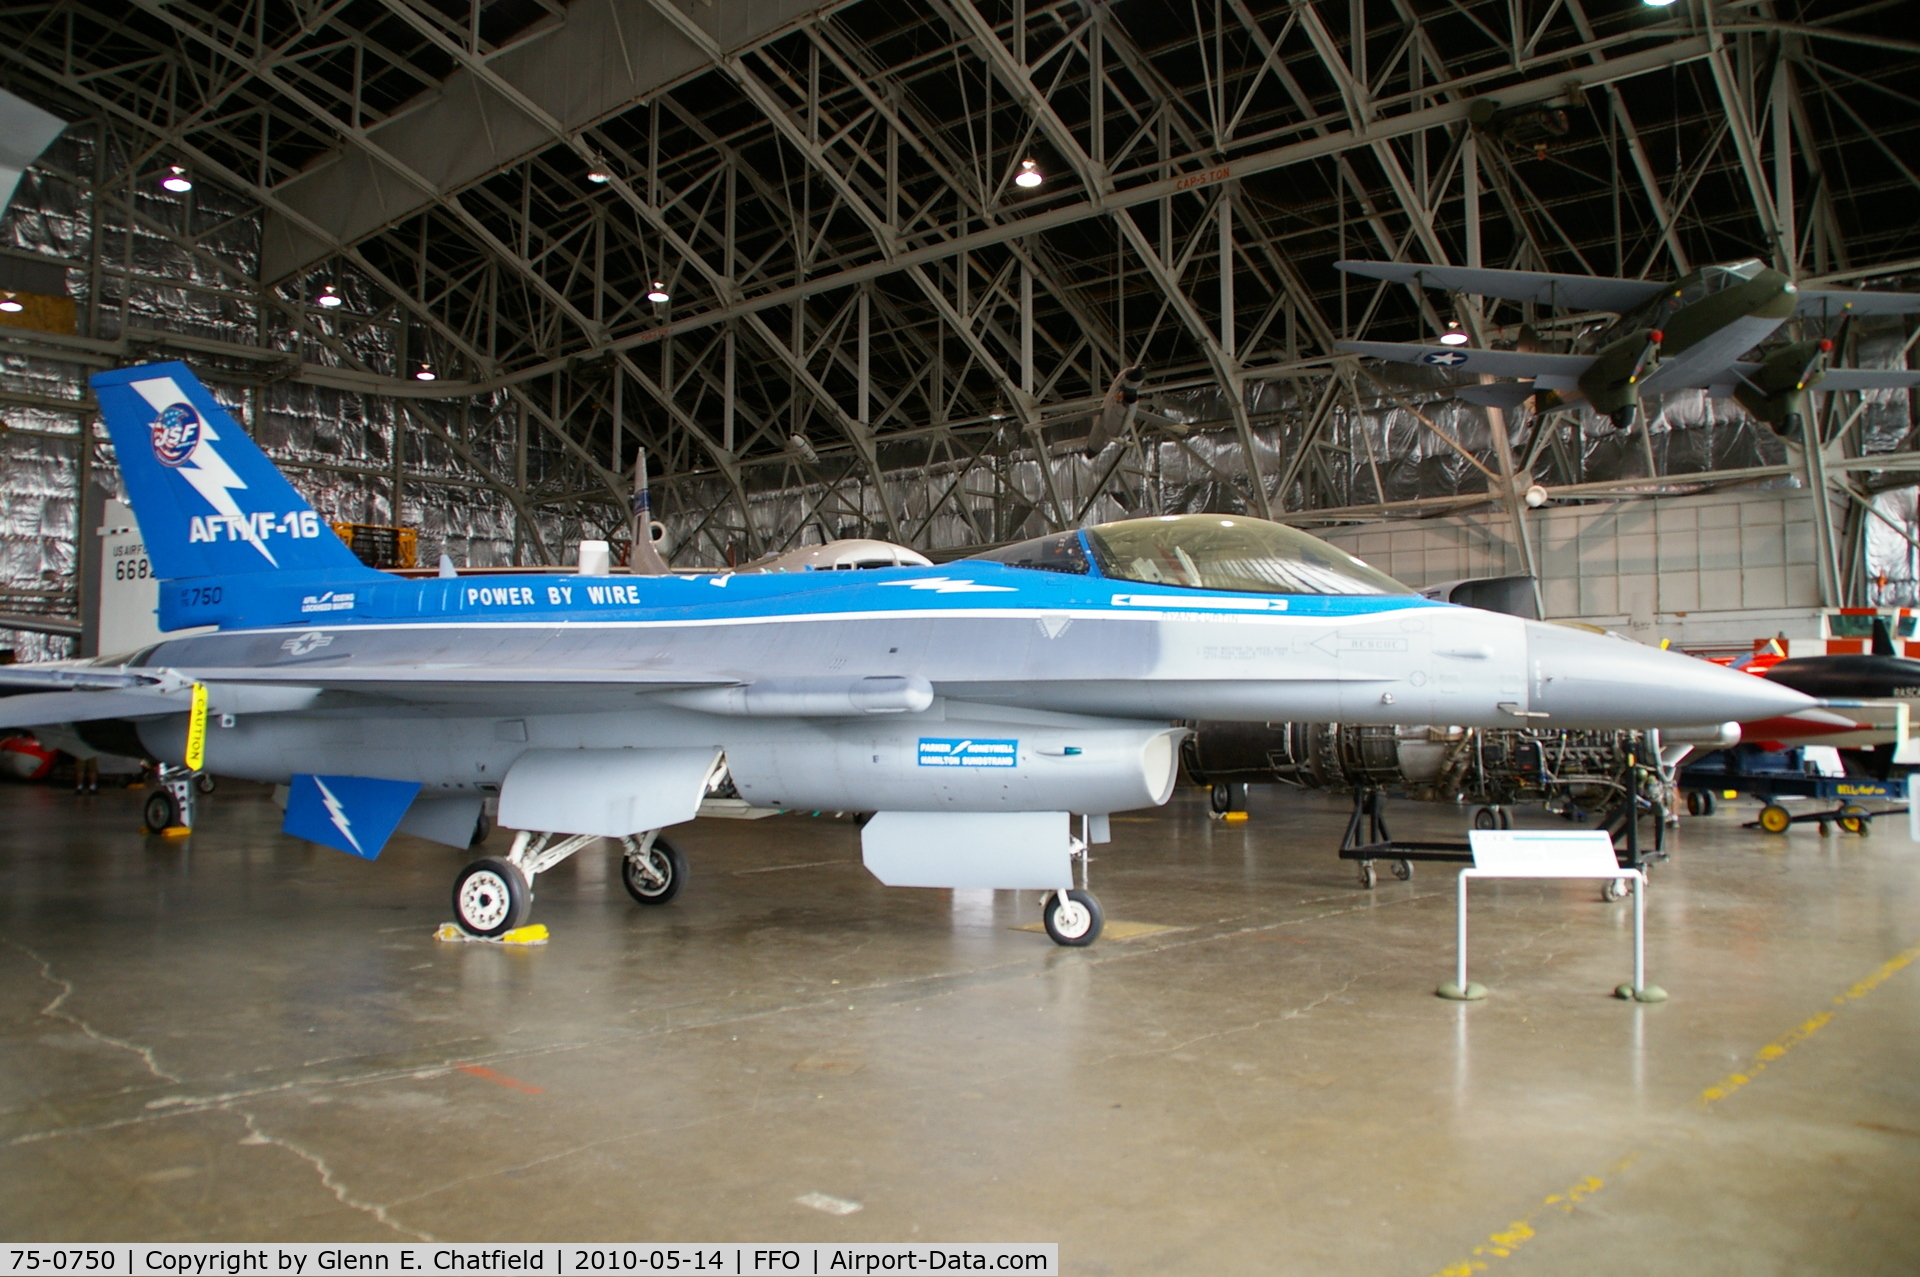 75-0750, 1975 General Dynamics YF-16A Fighting Falcon C/N 61-6, At the National Museum of the USAF